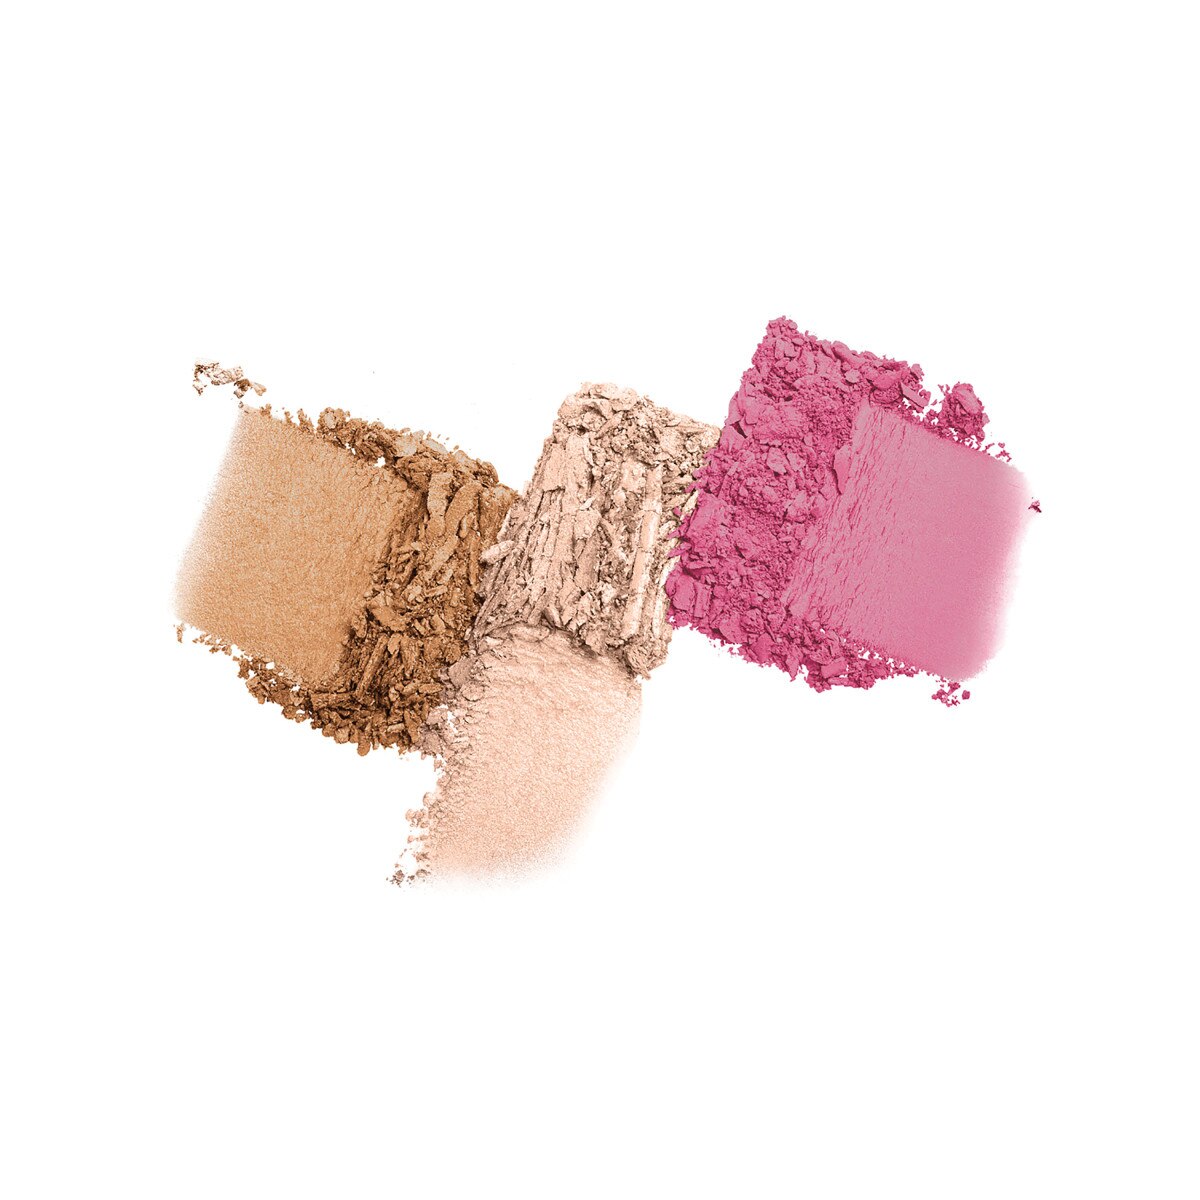 A trio of smears from a cheek sculpting palette showing the product texture